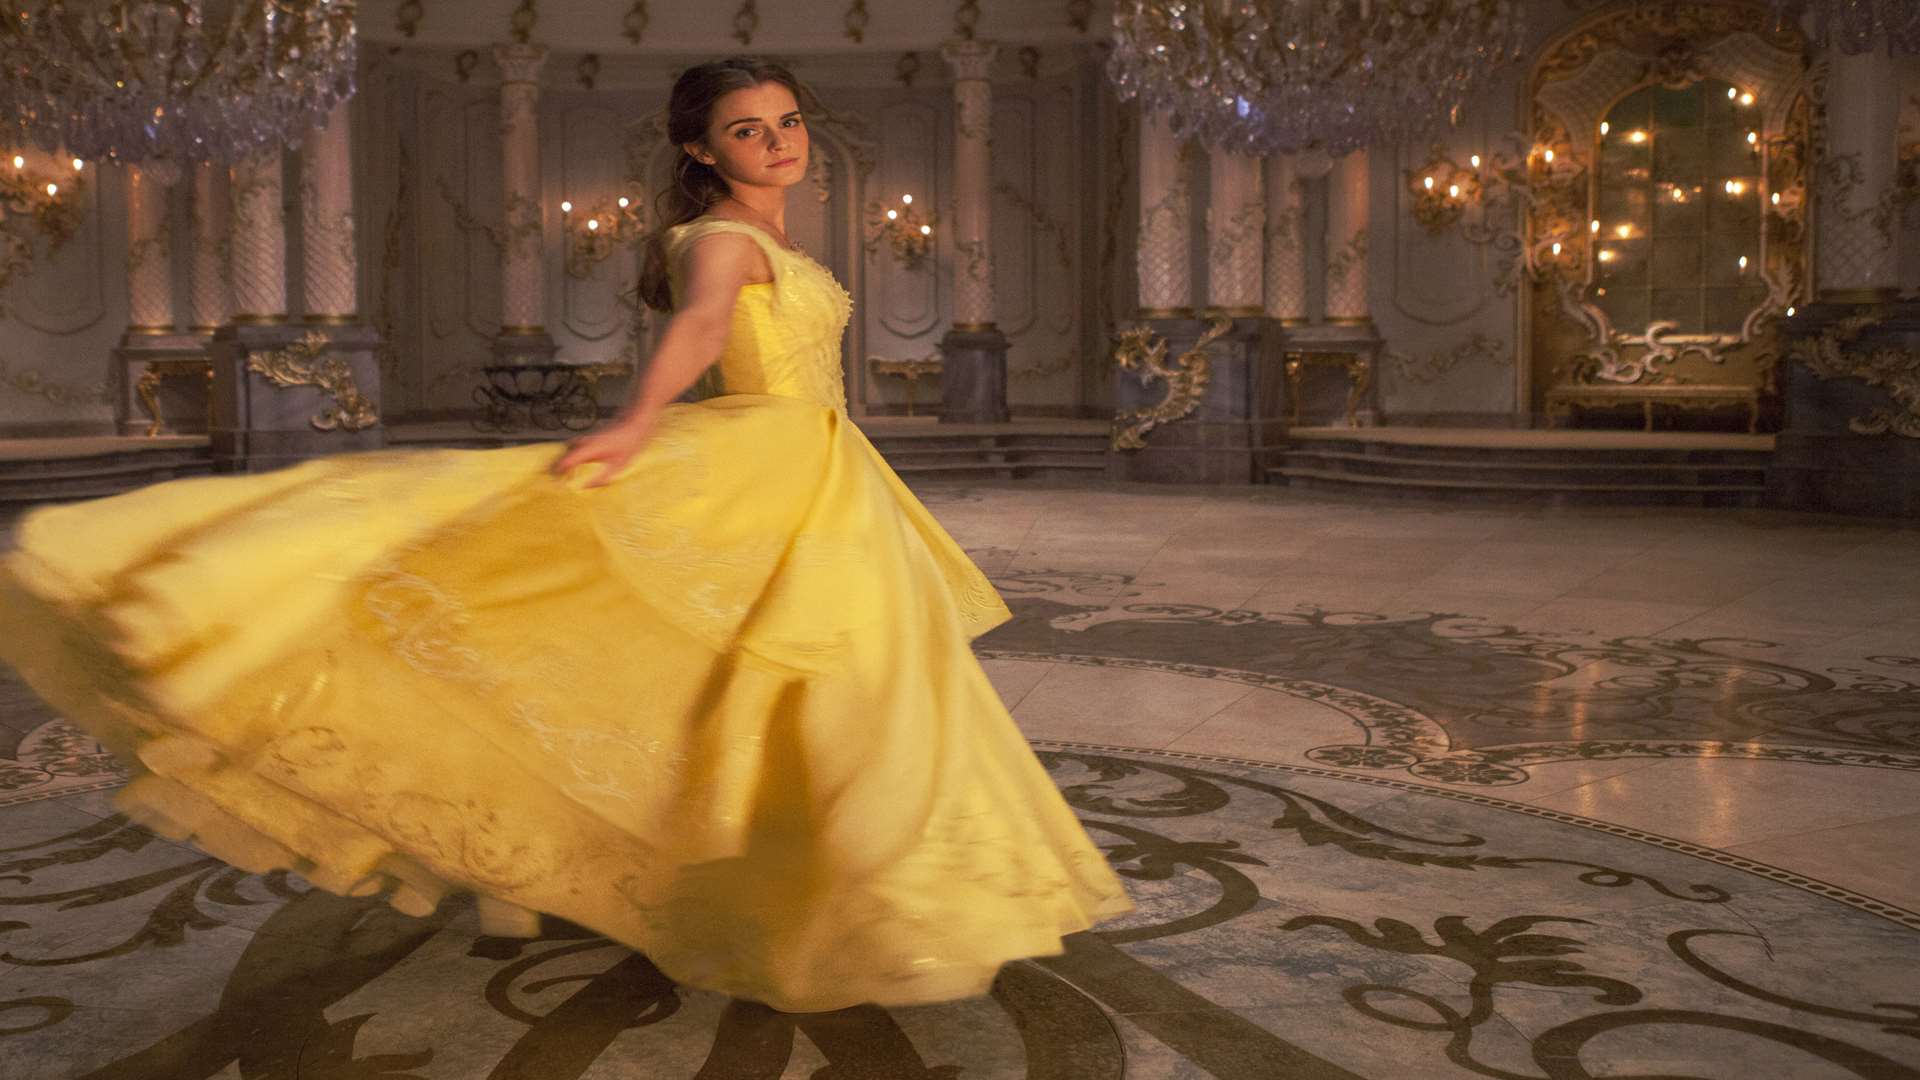 Disney's Beauty and the Beast is in cinemas now